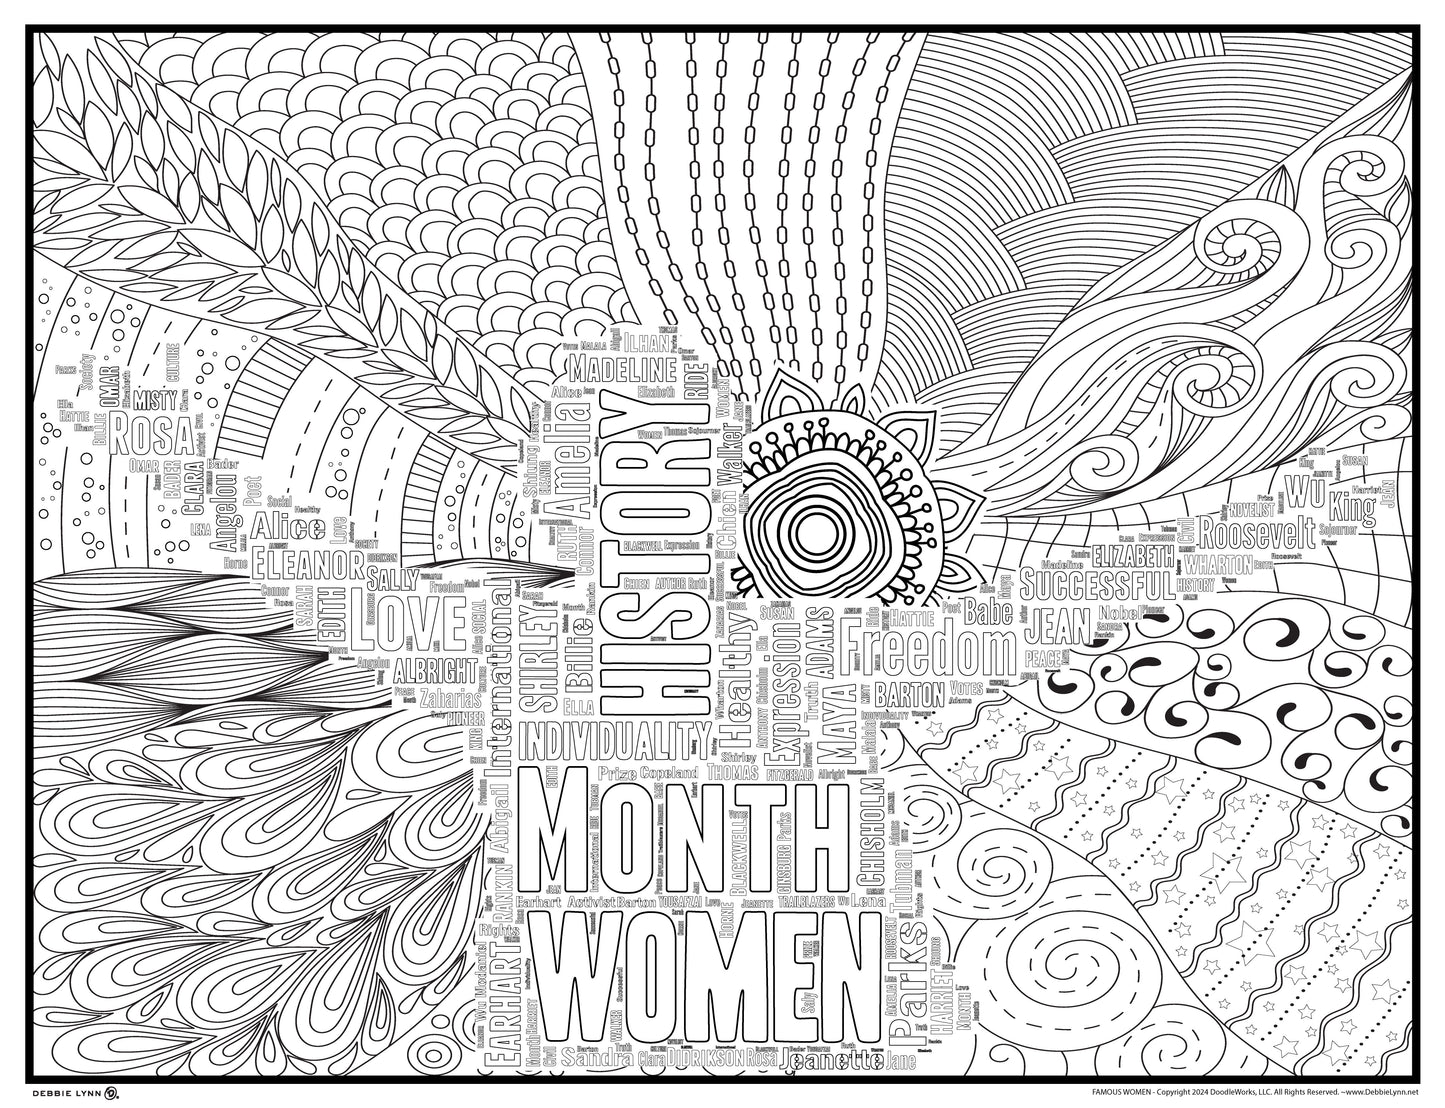 Famous Women Giant Coloring Poster 46x60"